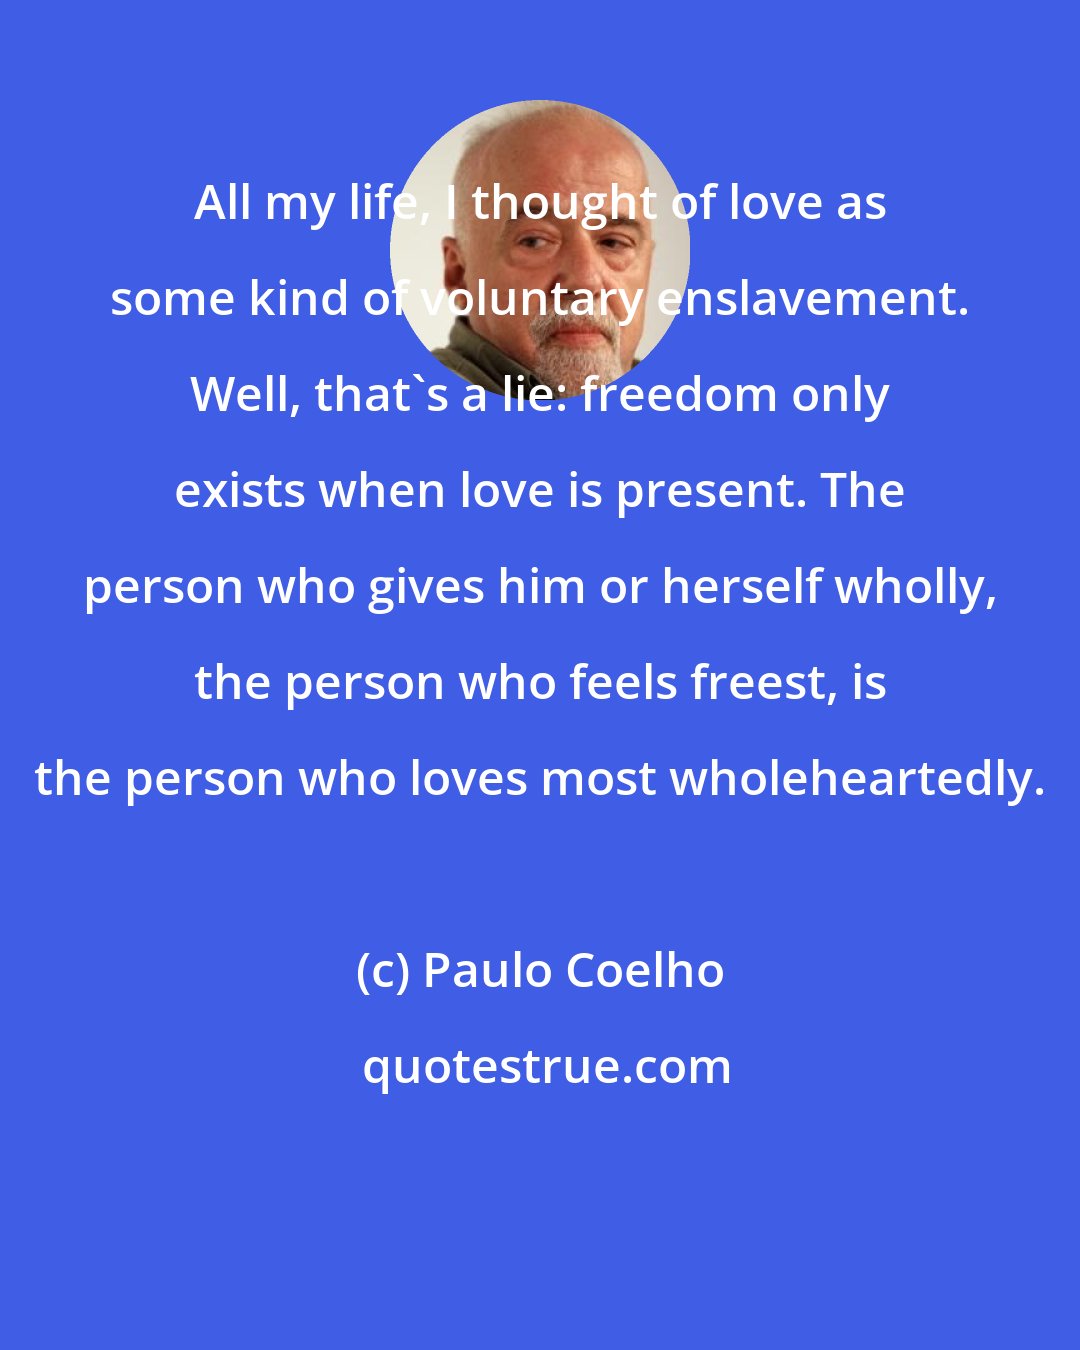 Paulo Coelho: All my life, I thought of love as some kind of voluntary enslavement. Well, that's a lie: freedom only exists when love is present. The person who gives him or herself wholly, the person who feels freest, is the person who loves most wholeheartedly.